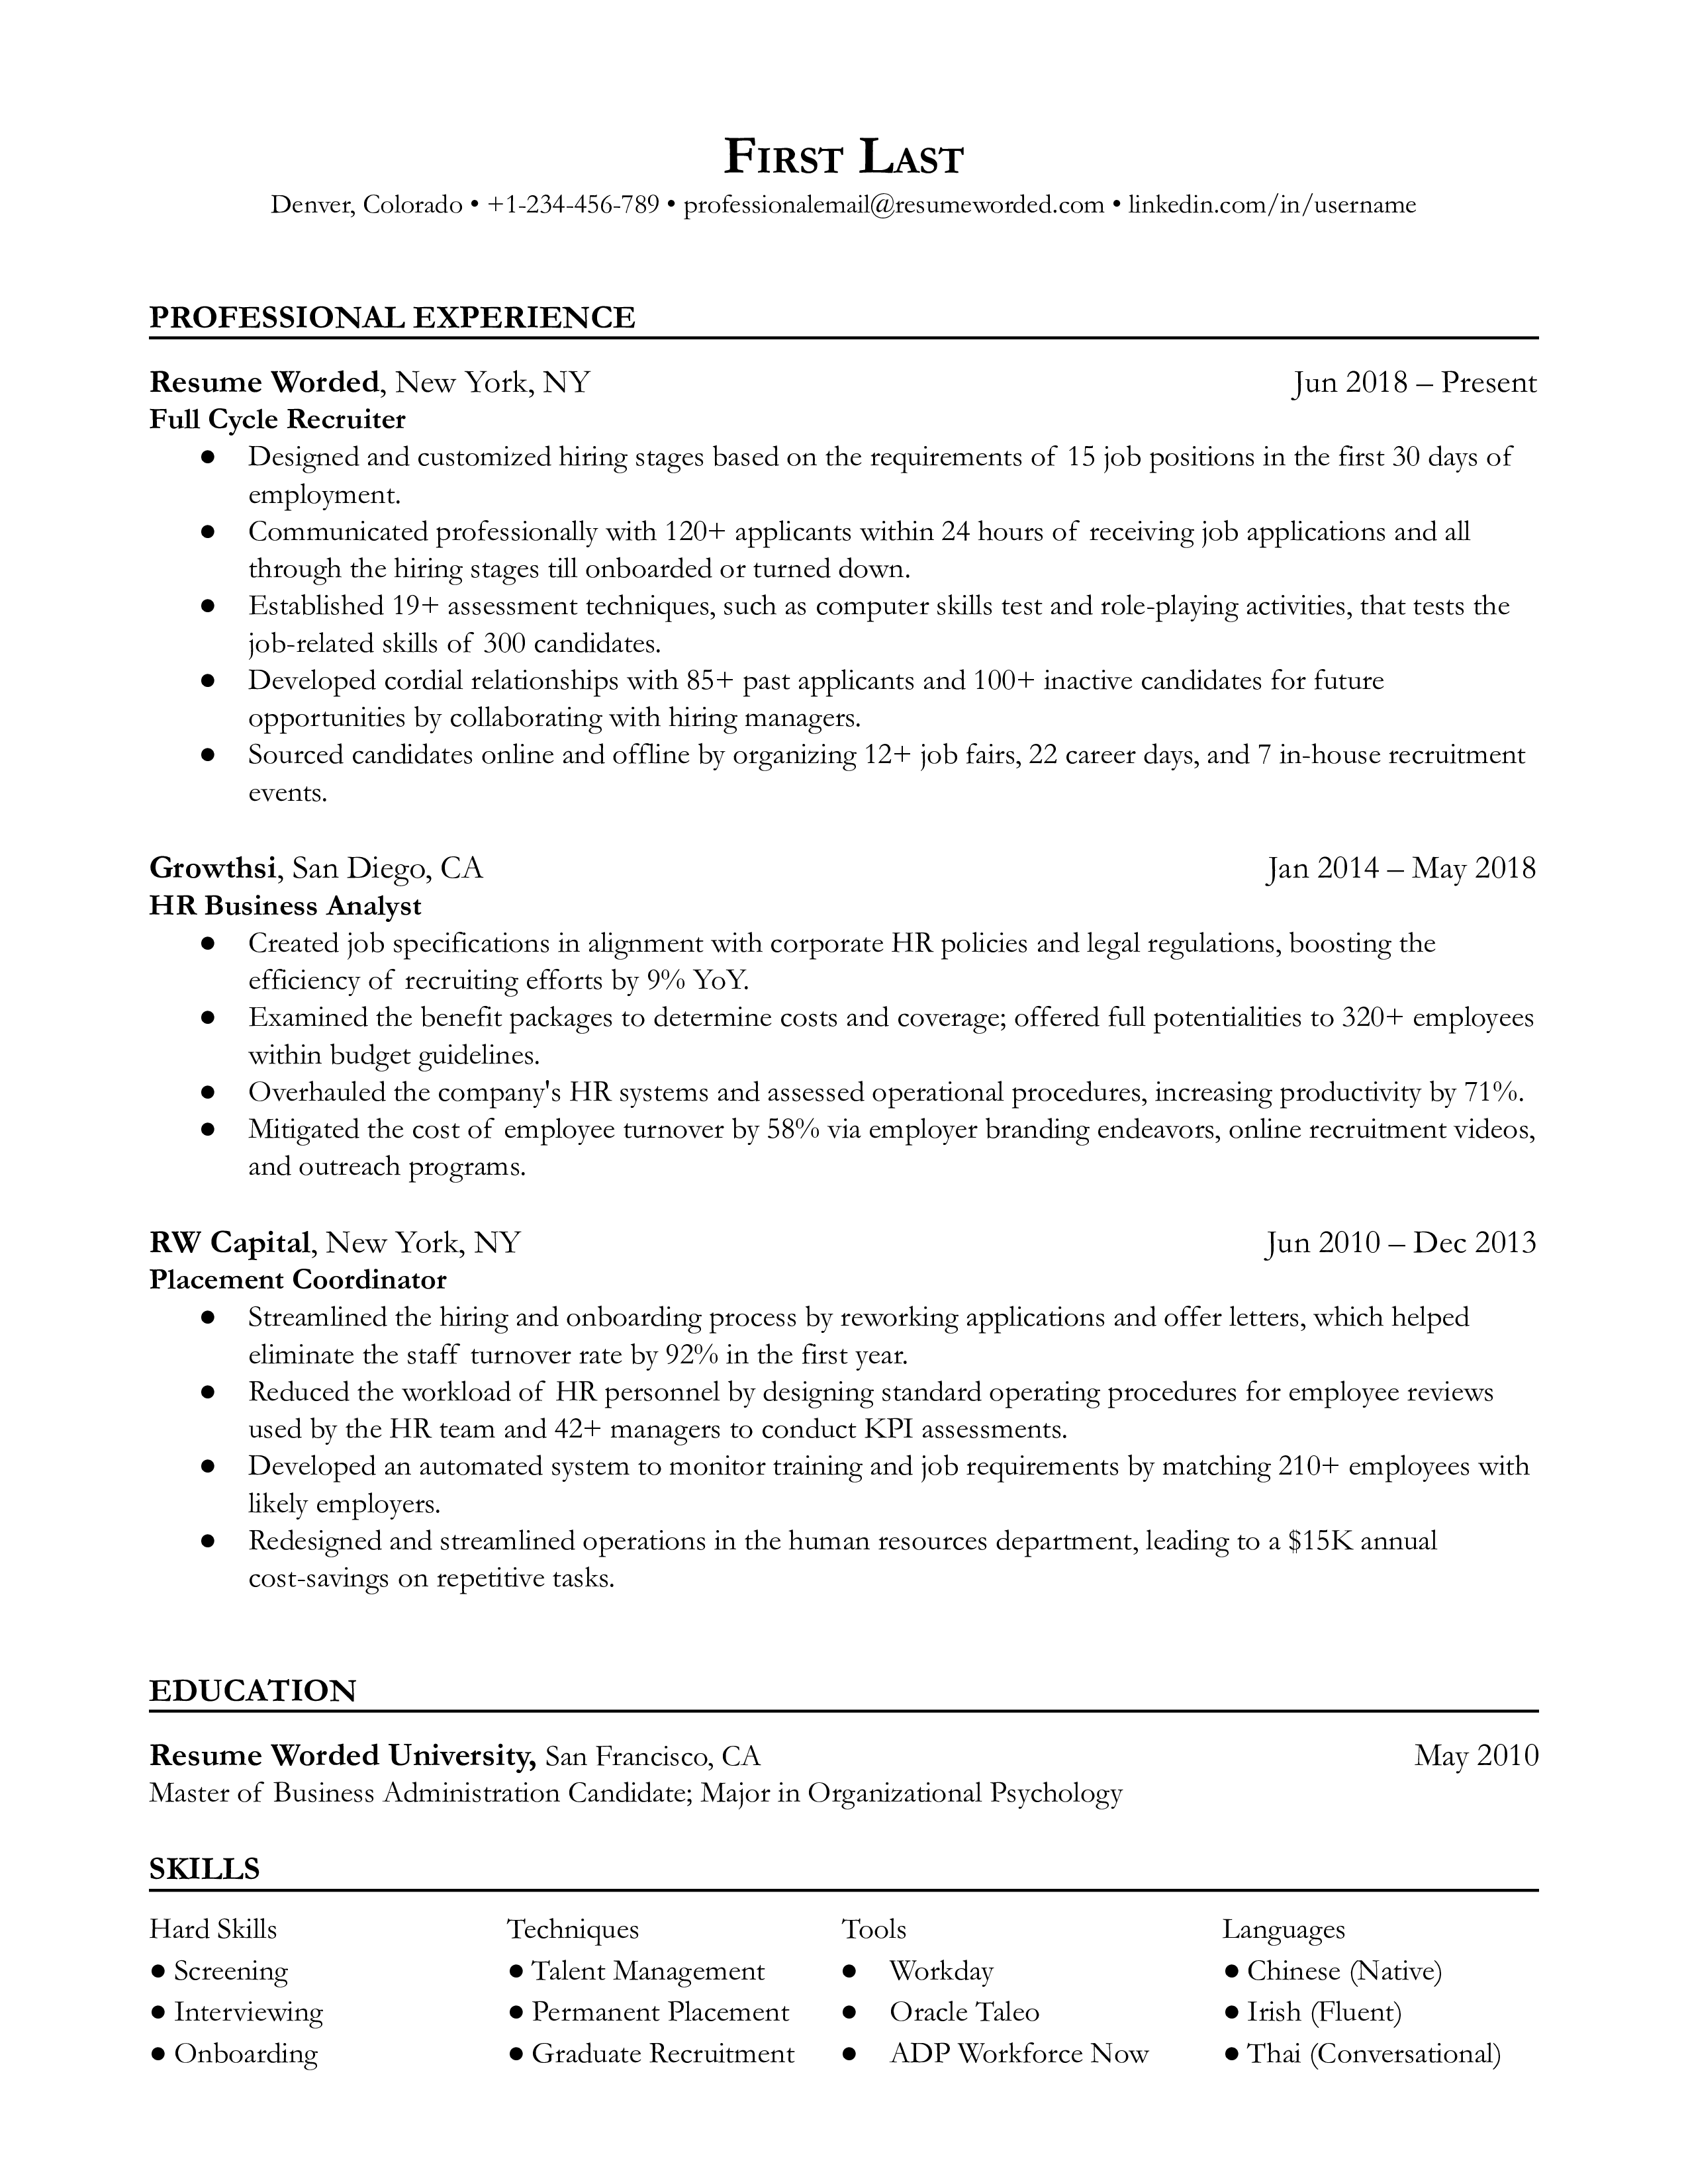 A full-cycle recruiter resume sample that highlights the applicant’s full-cycle experience and language skills.